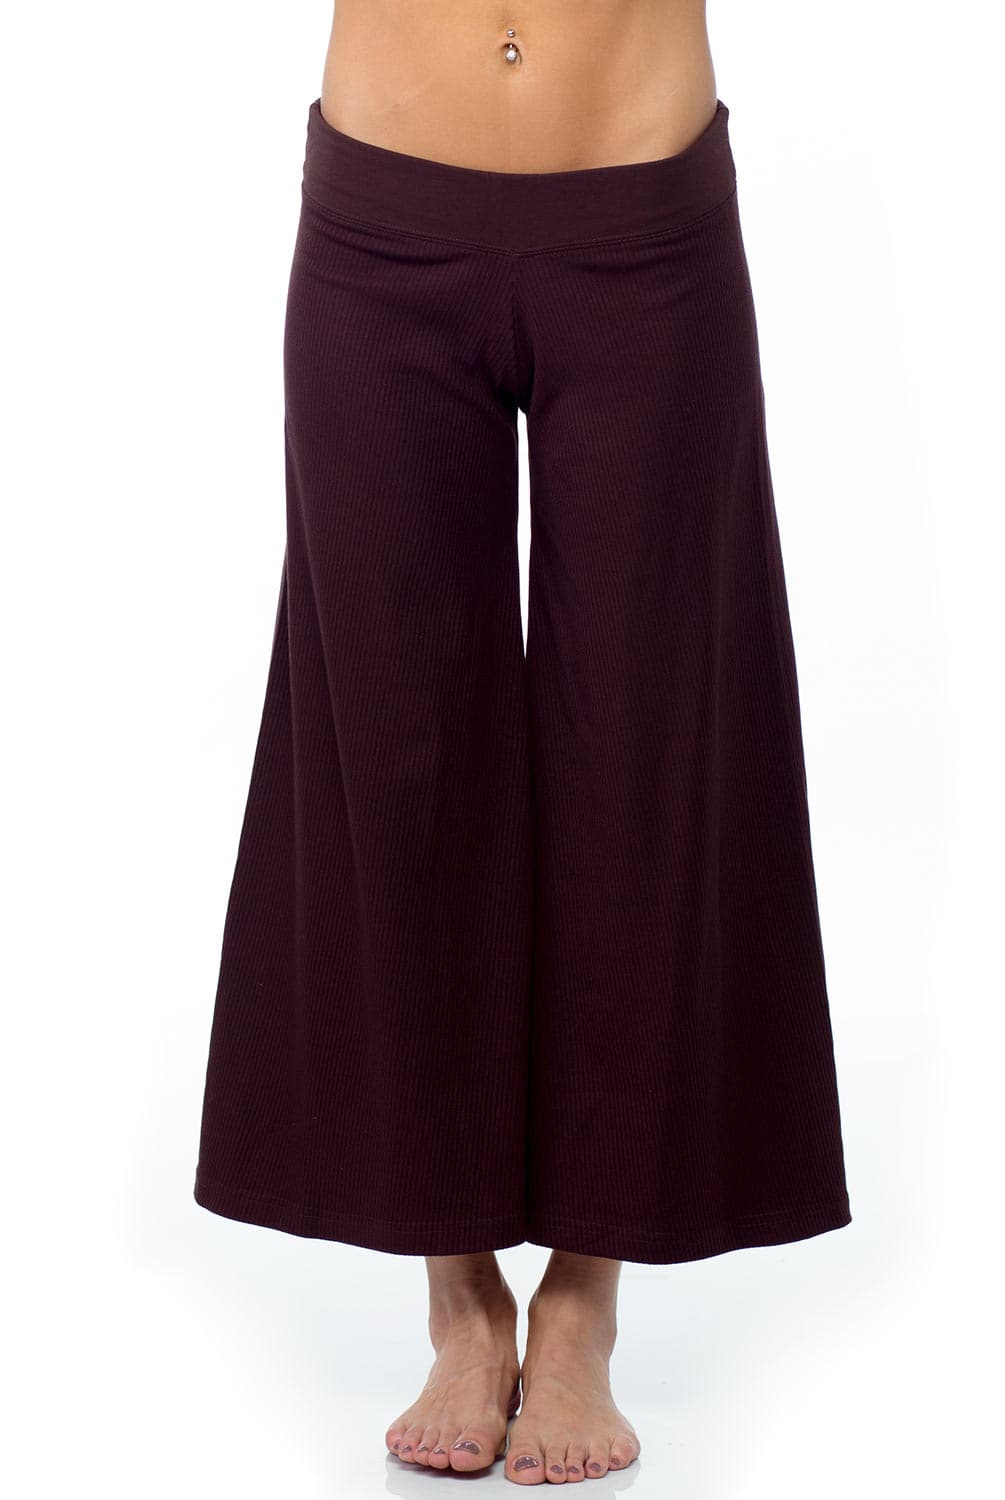 Sandra McCray Ribbed Crop Palazzo Pant - Evolve Fit Wear